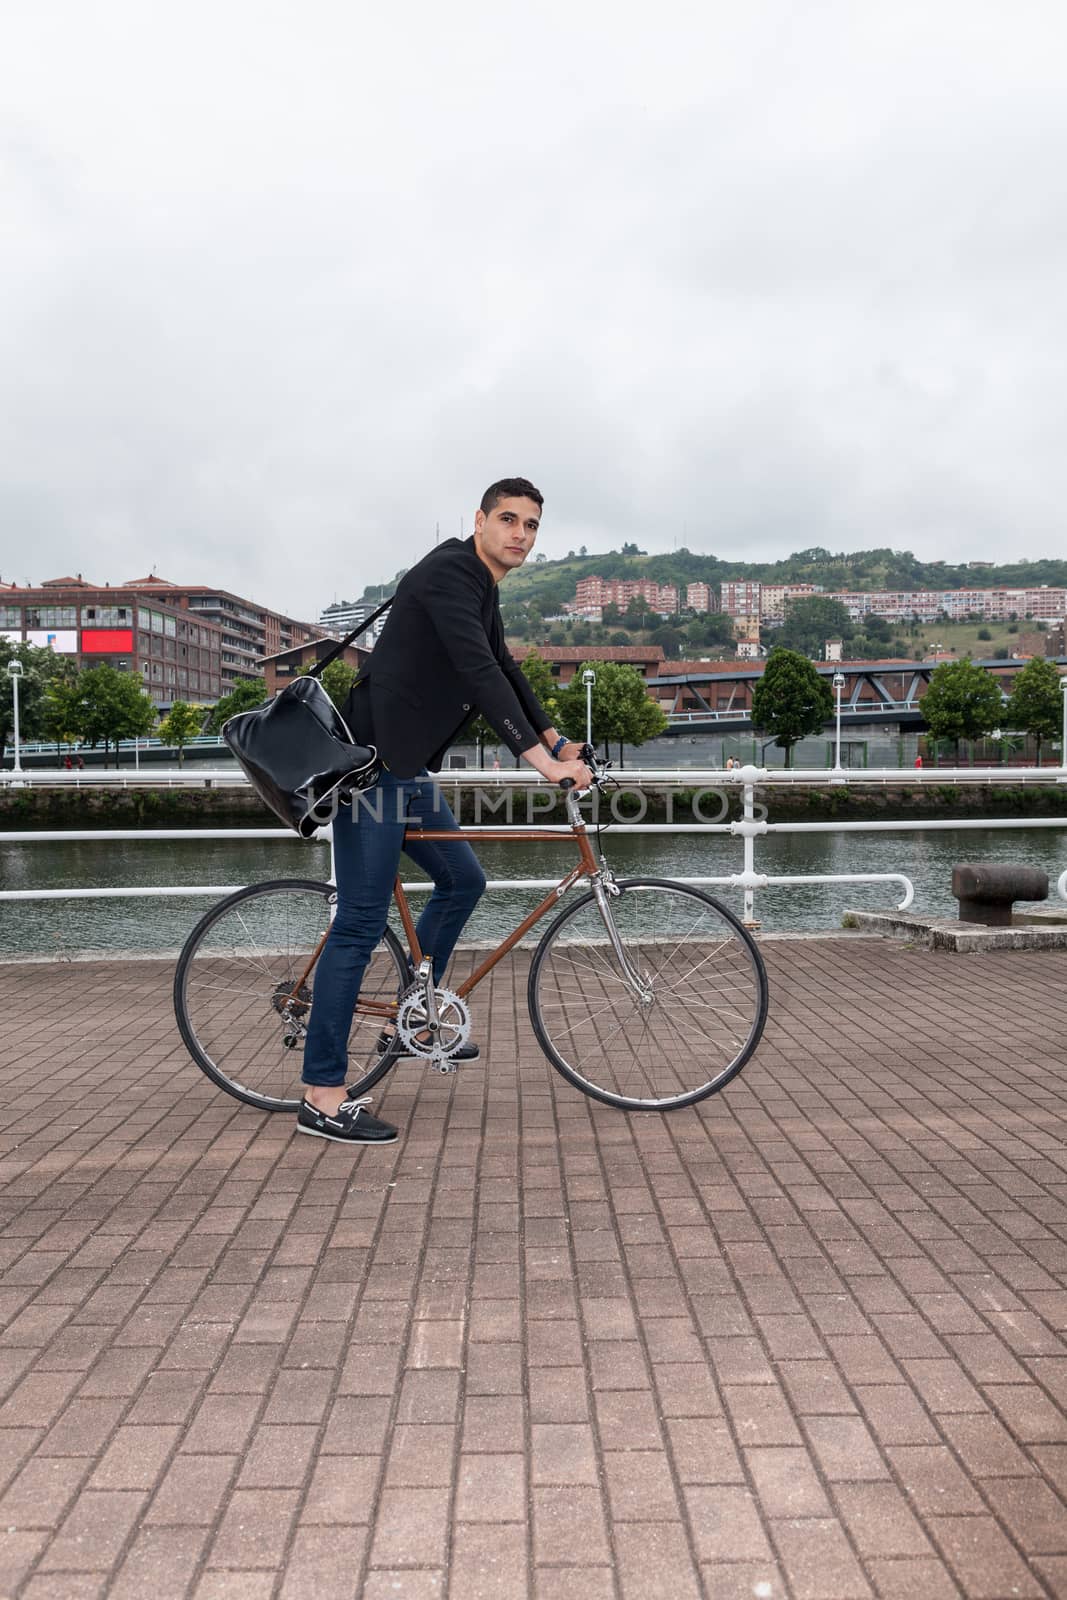 Close up or a young man riding on a bike on a cloudy day near the river with a shoulder bag and jeans on a cloudy day